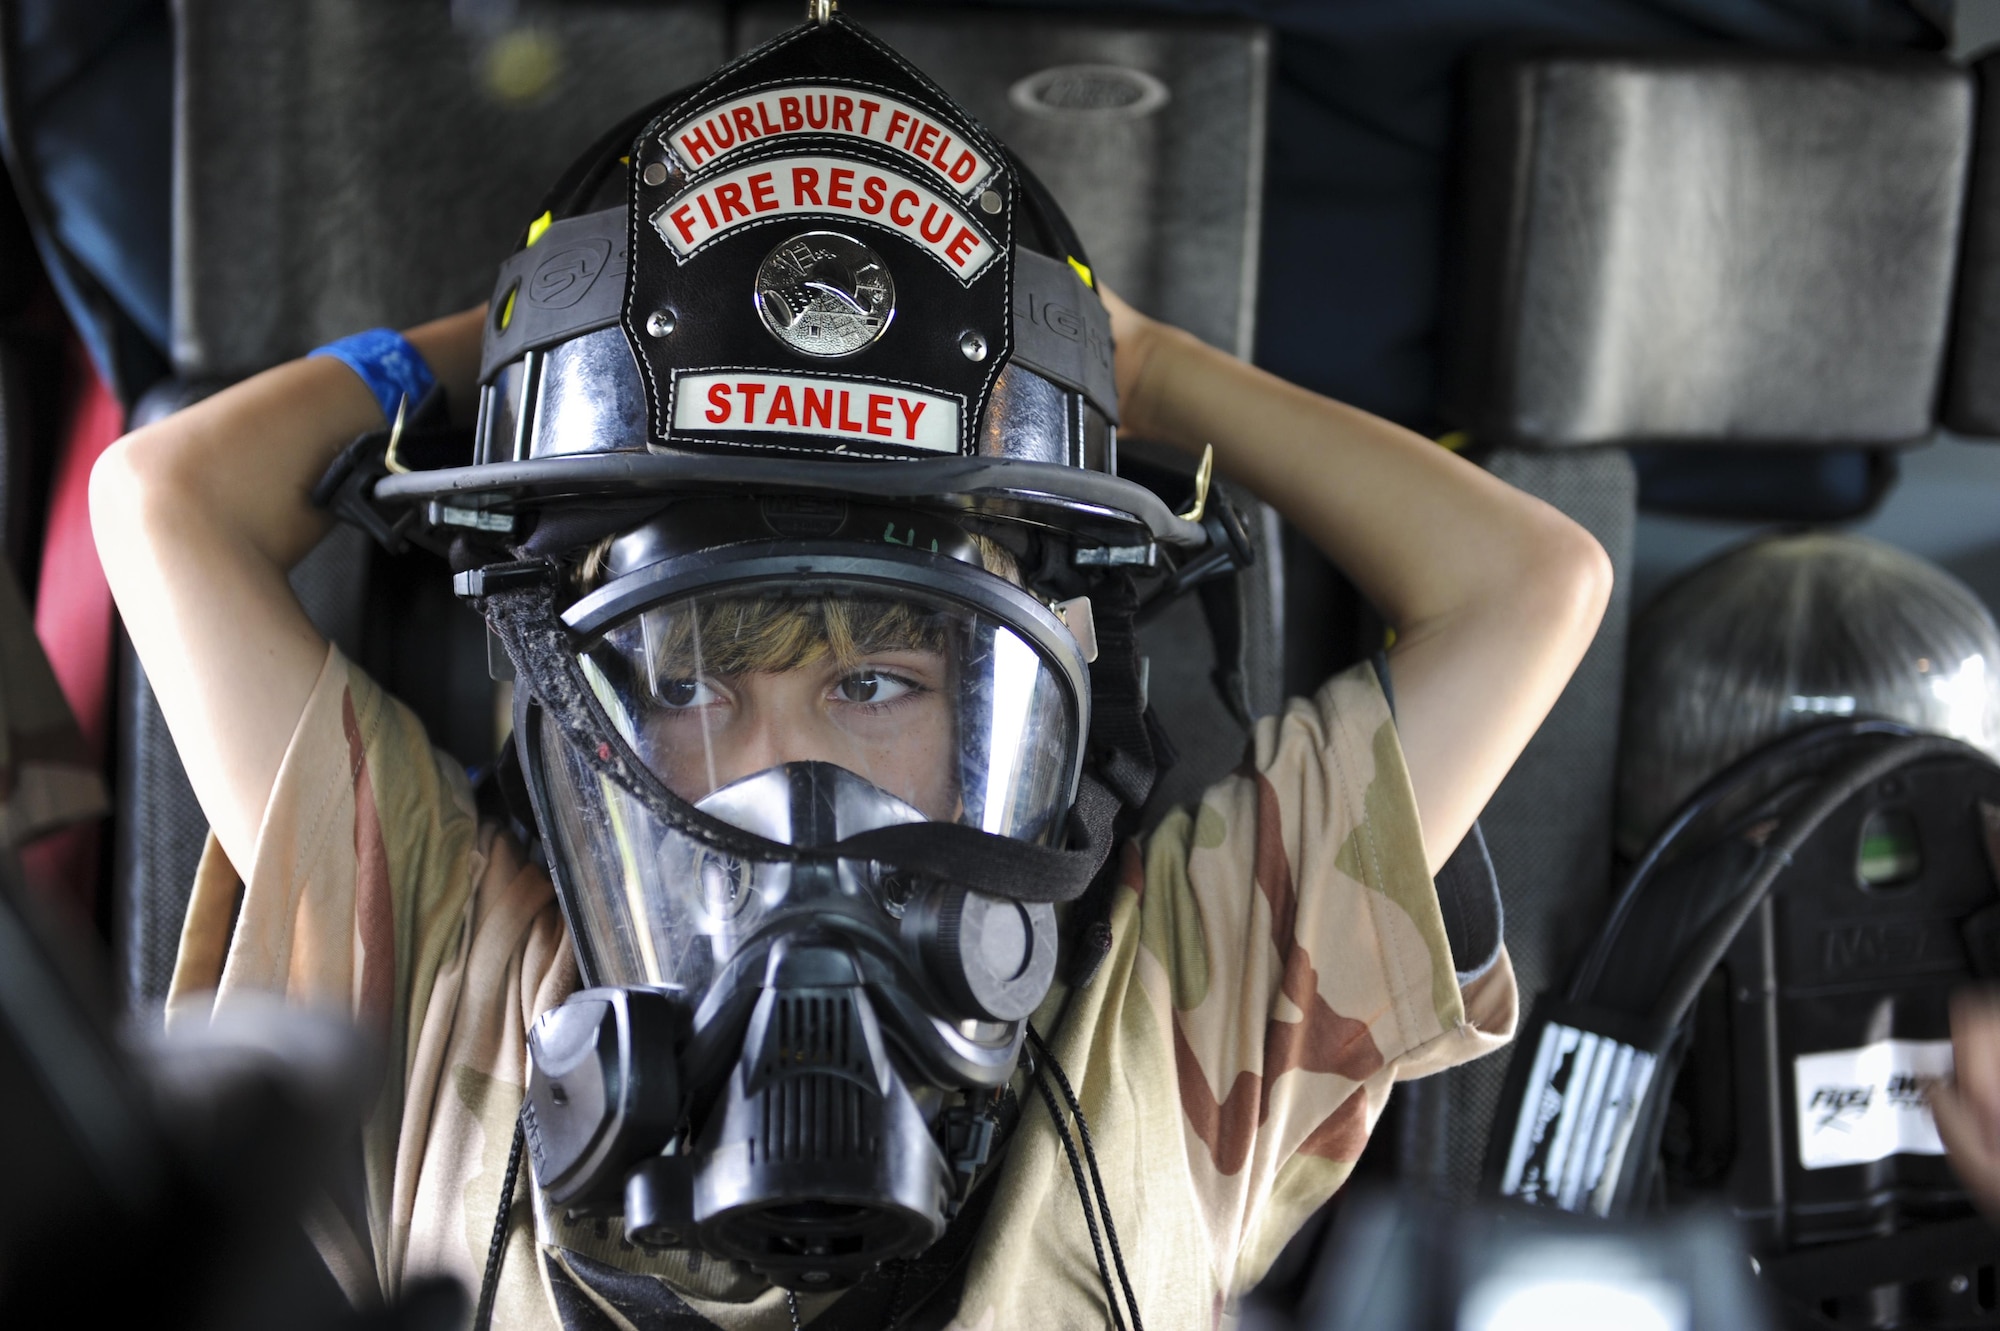 A military child relaxes in a fire truck during Operation Kids Understanding Deployment Operations at Hurlburt Field, Fla., April 30, 2016. Operation KUDOS is an educational event to help build resiliency in military youth by engaging them in activities that simulate the pre-deployment experience. The event concluded with a “homecoming” where parents welcomed back their children. (U.S. Air Force photo by Senior Airman Meagan Schutter)